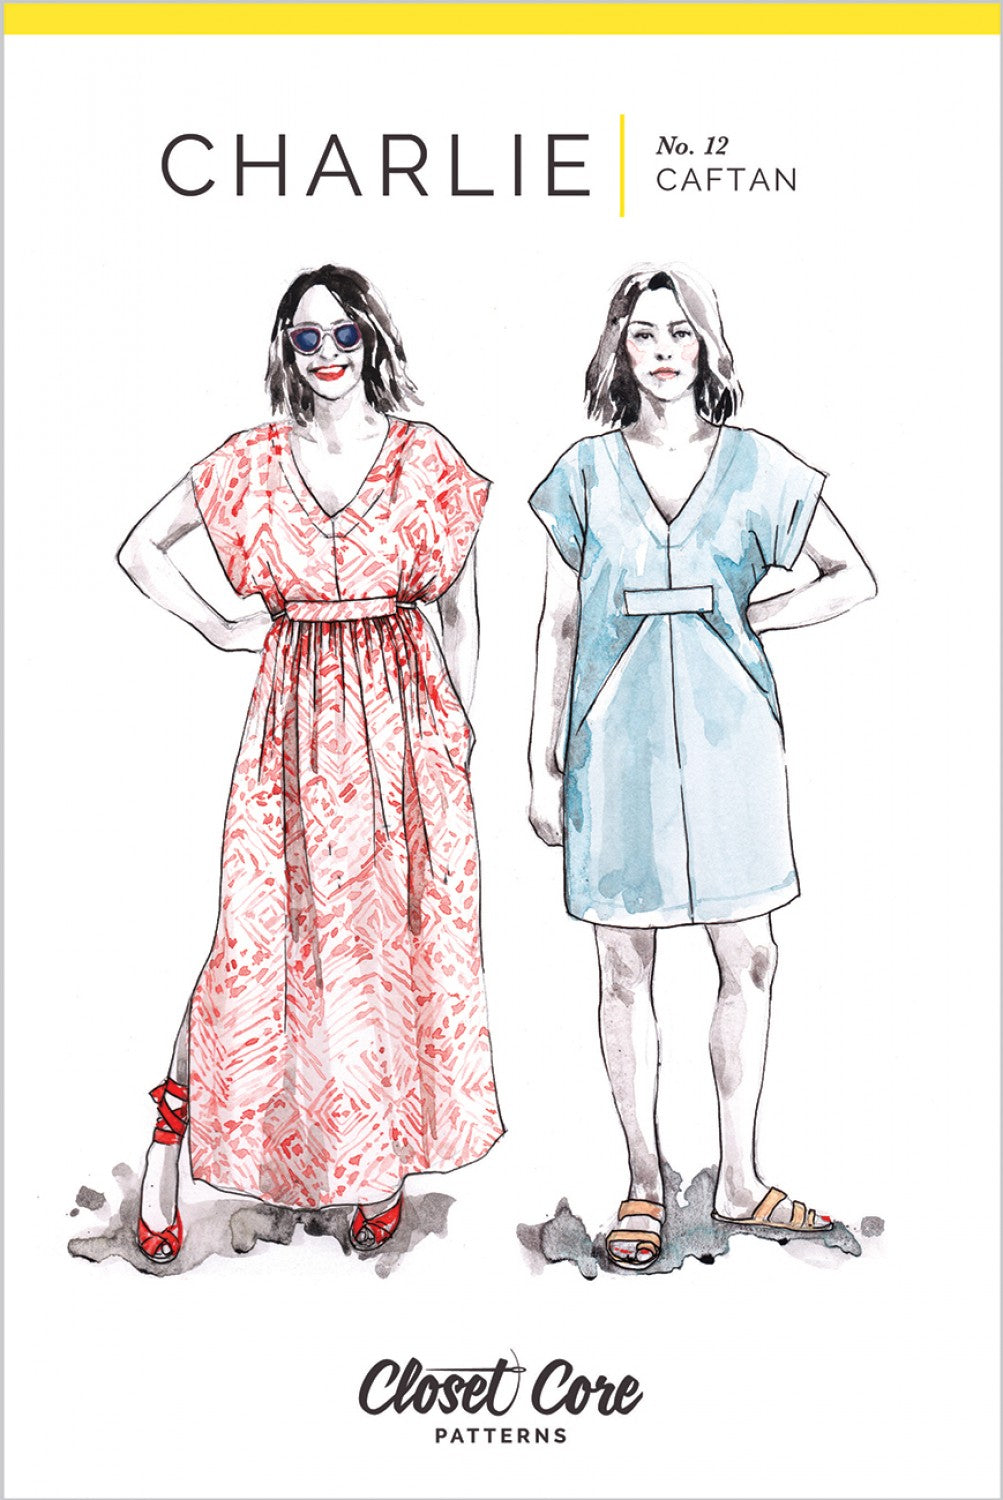 Charlie Caftan - By Closet Core Patterns